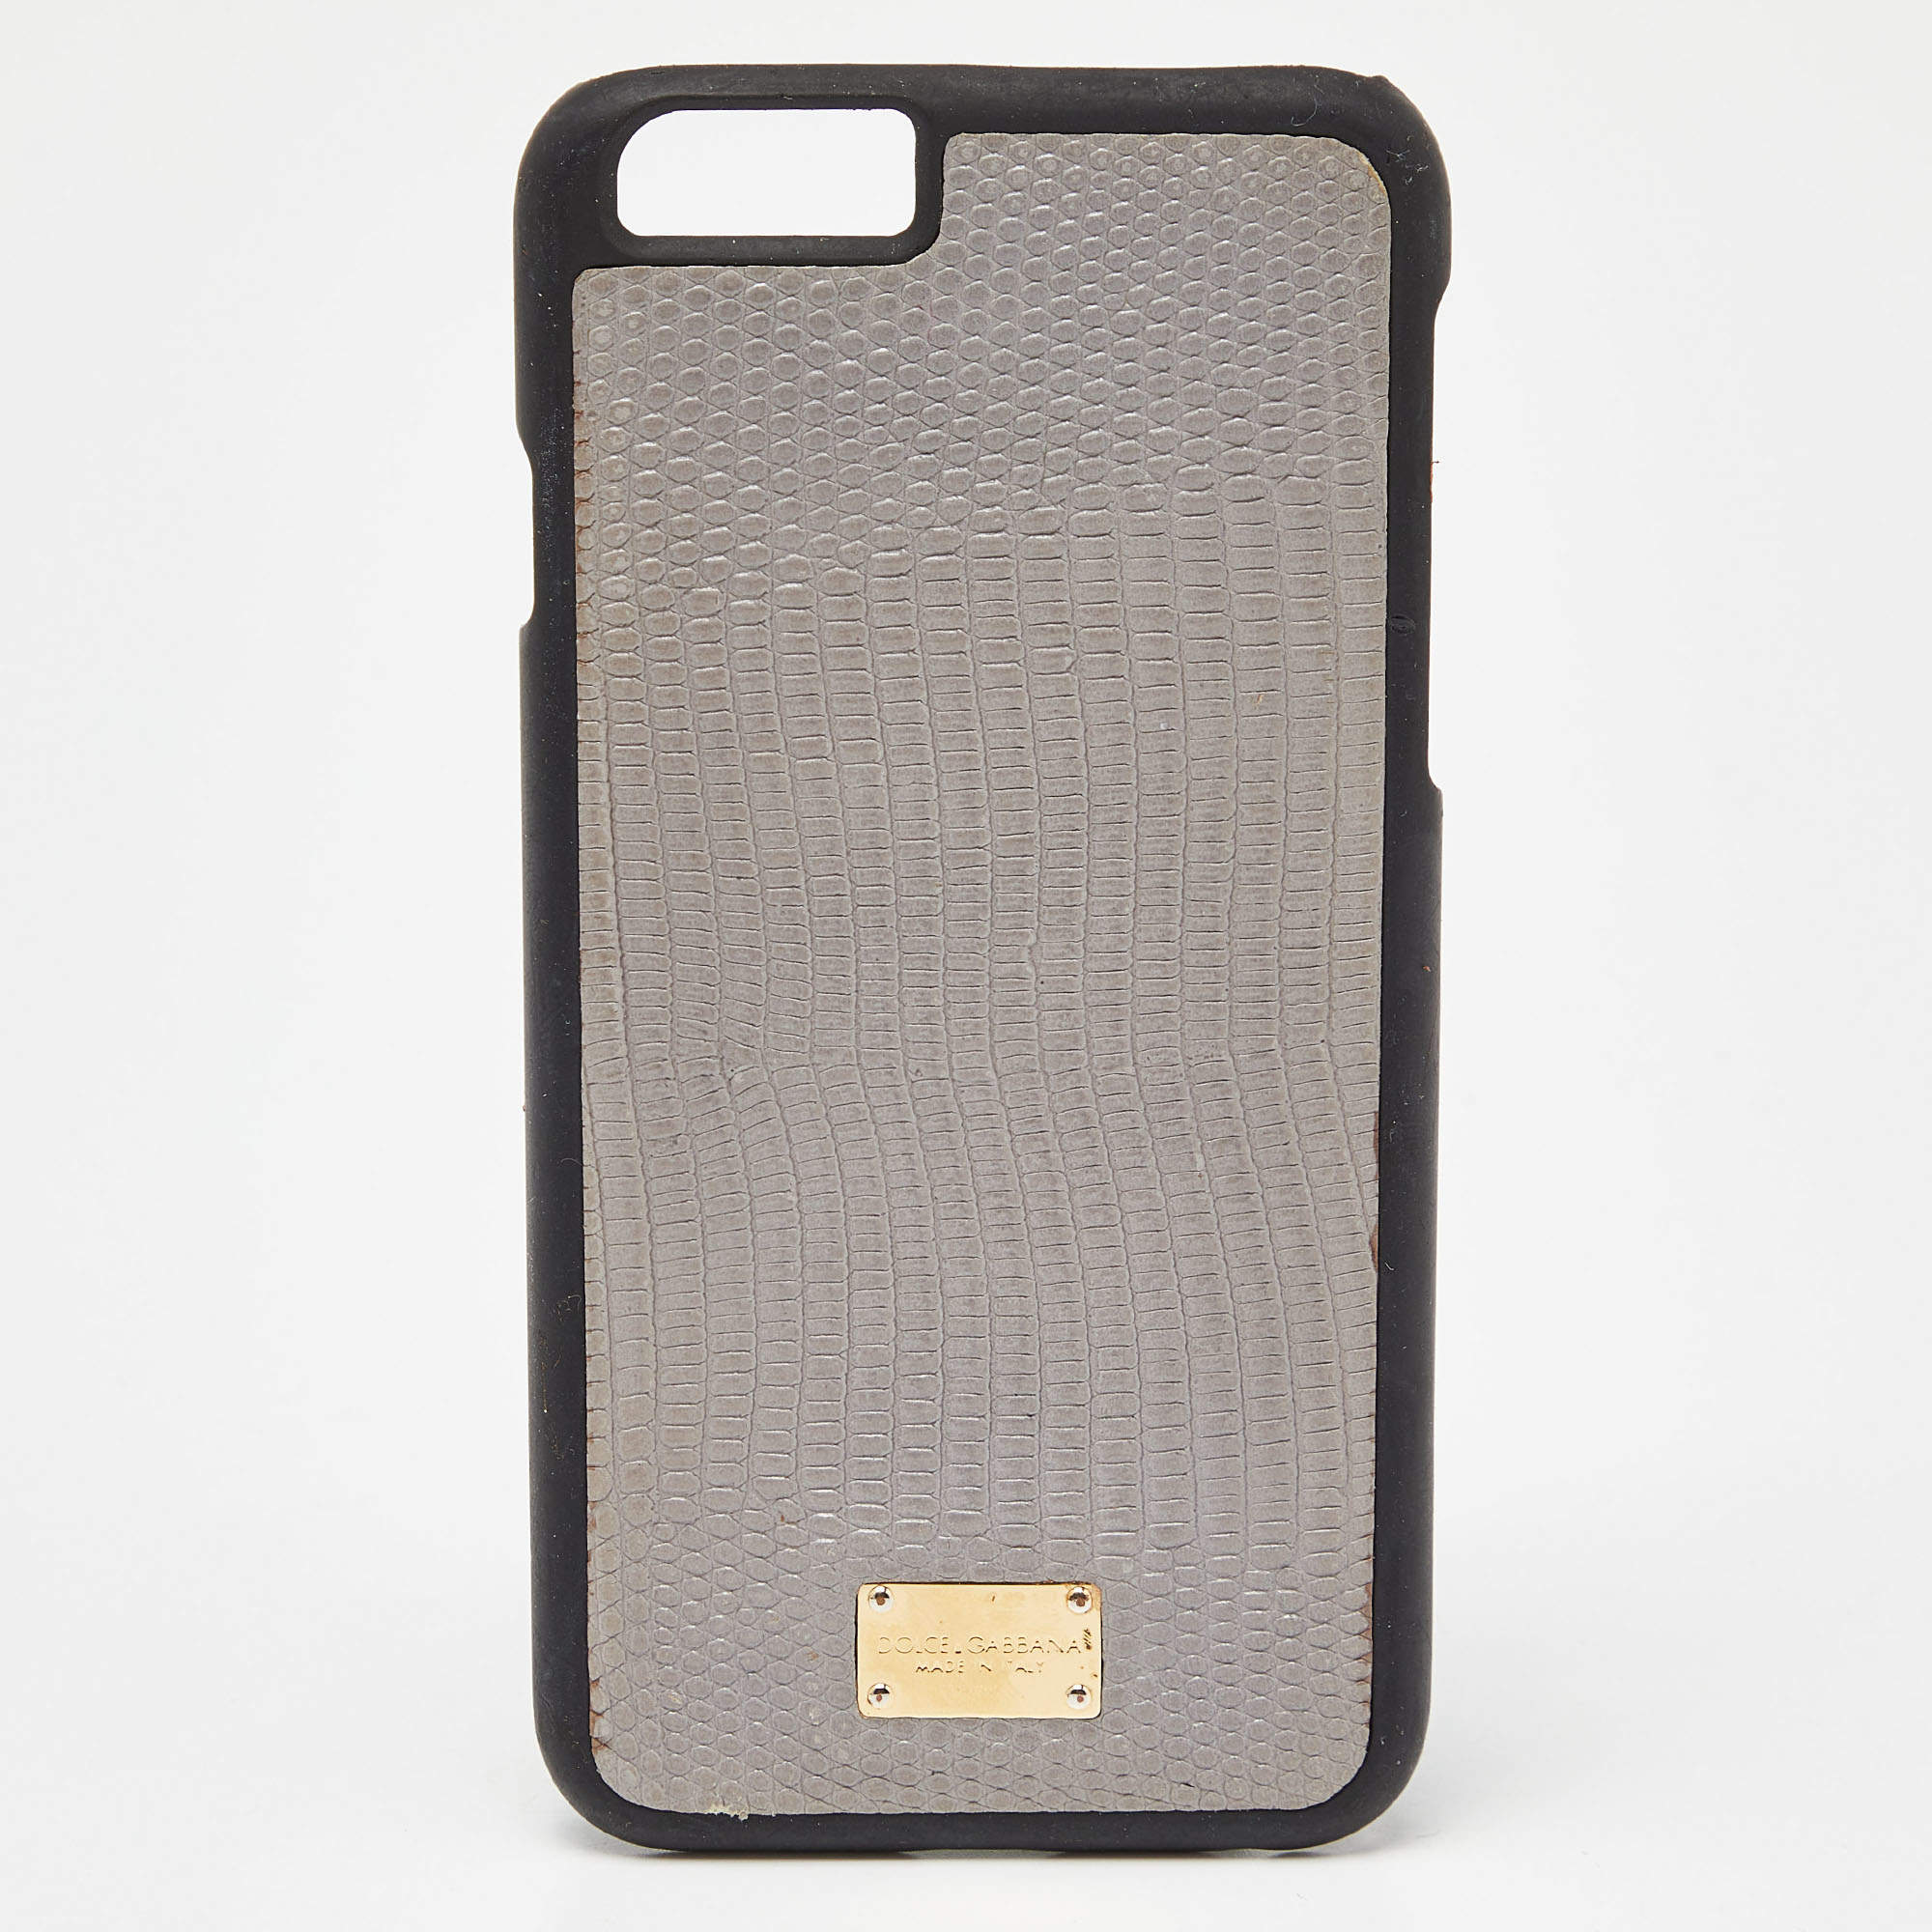 Dolce & Gabbana Grey Lizard Embossed Leather iPhone 6 Cover